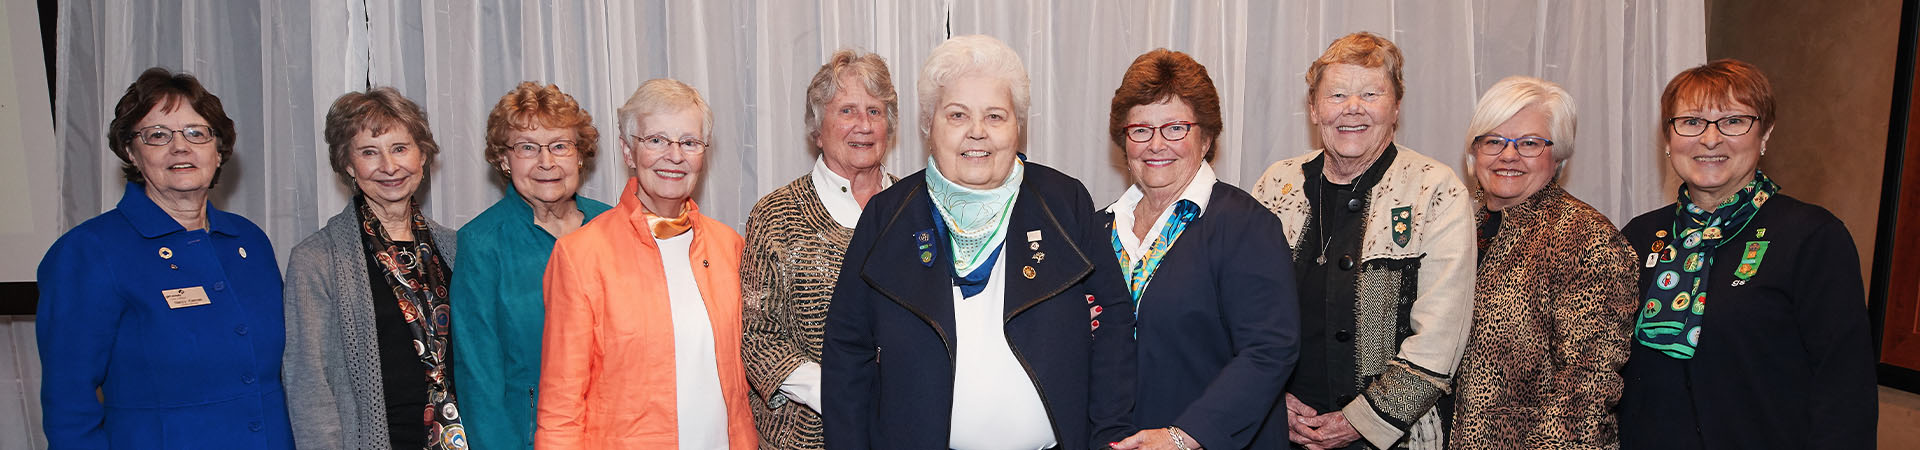  girl scout alum adult women retirement age smiling at camera 